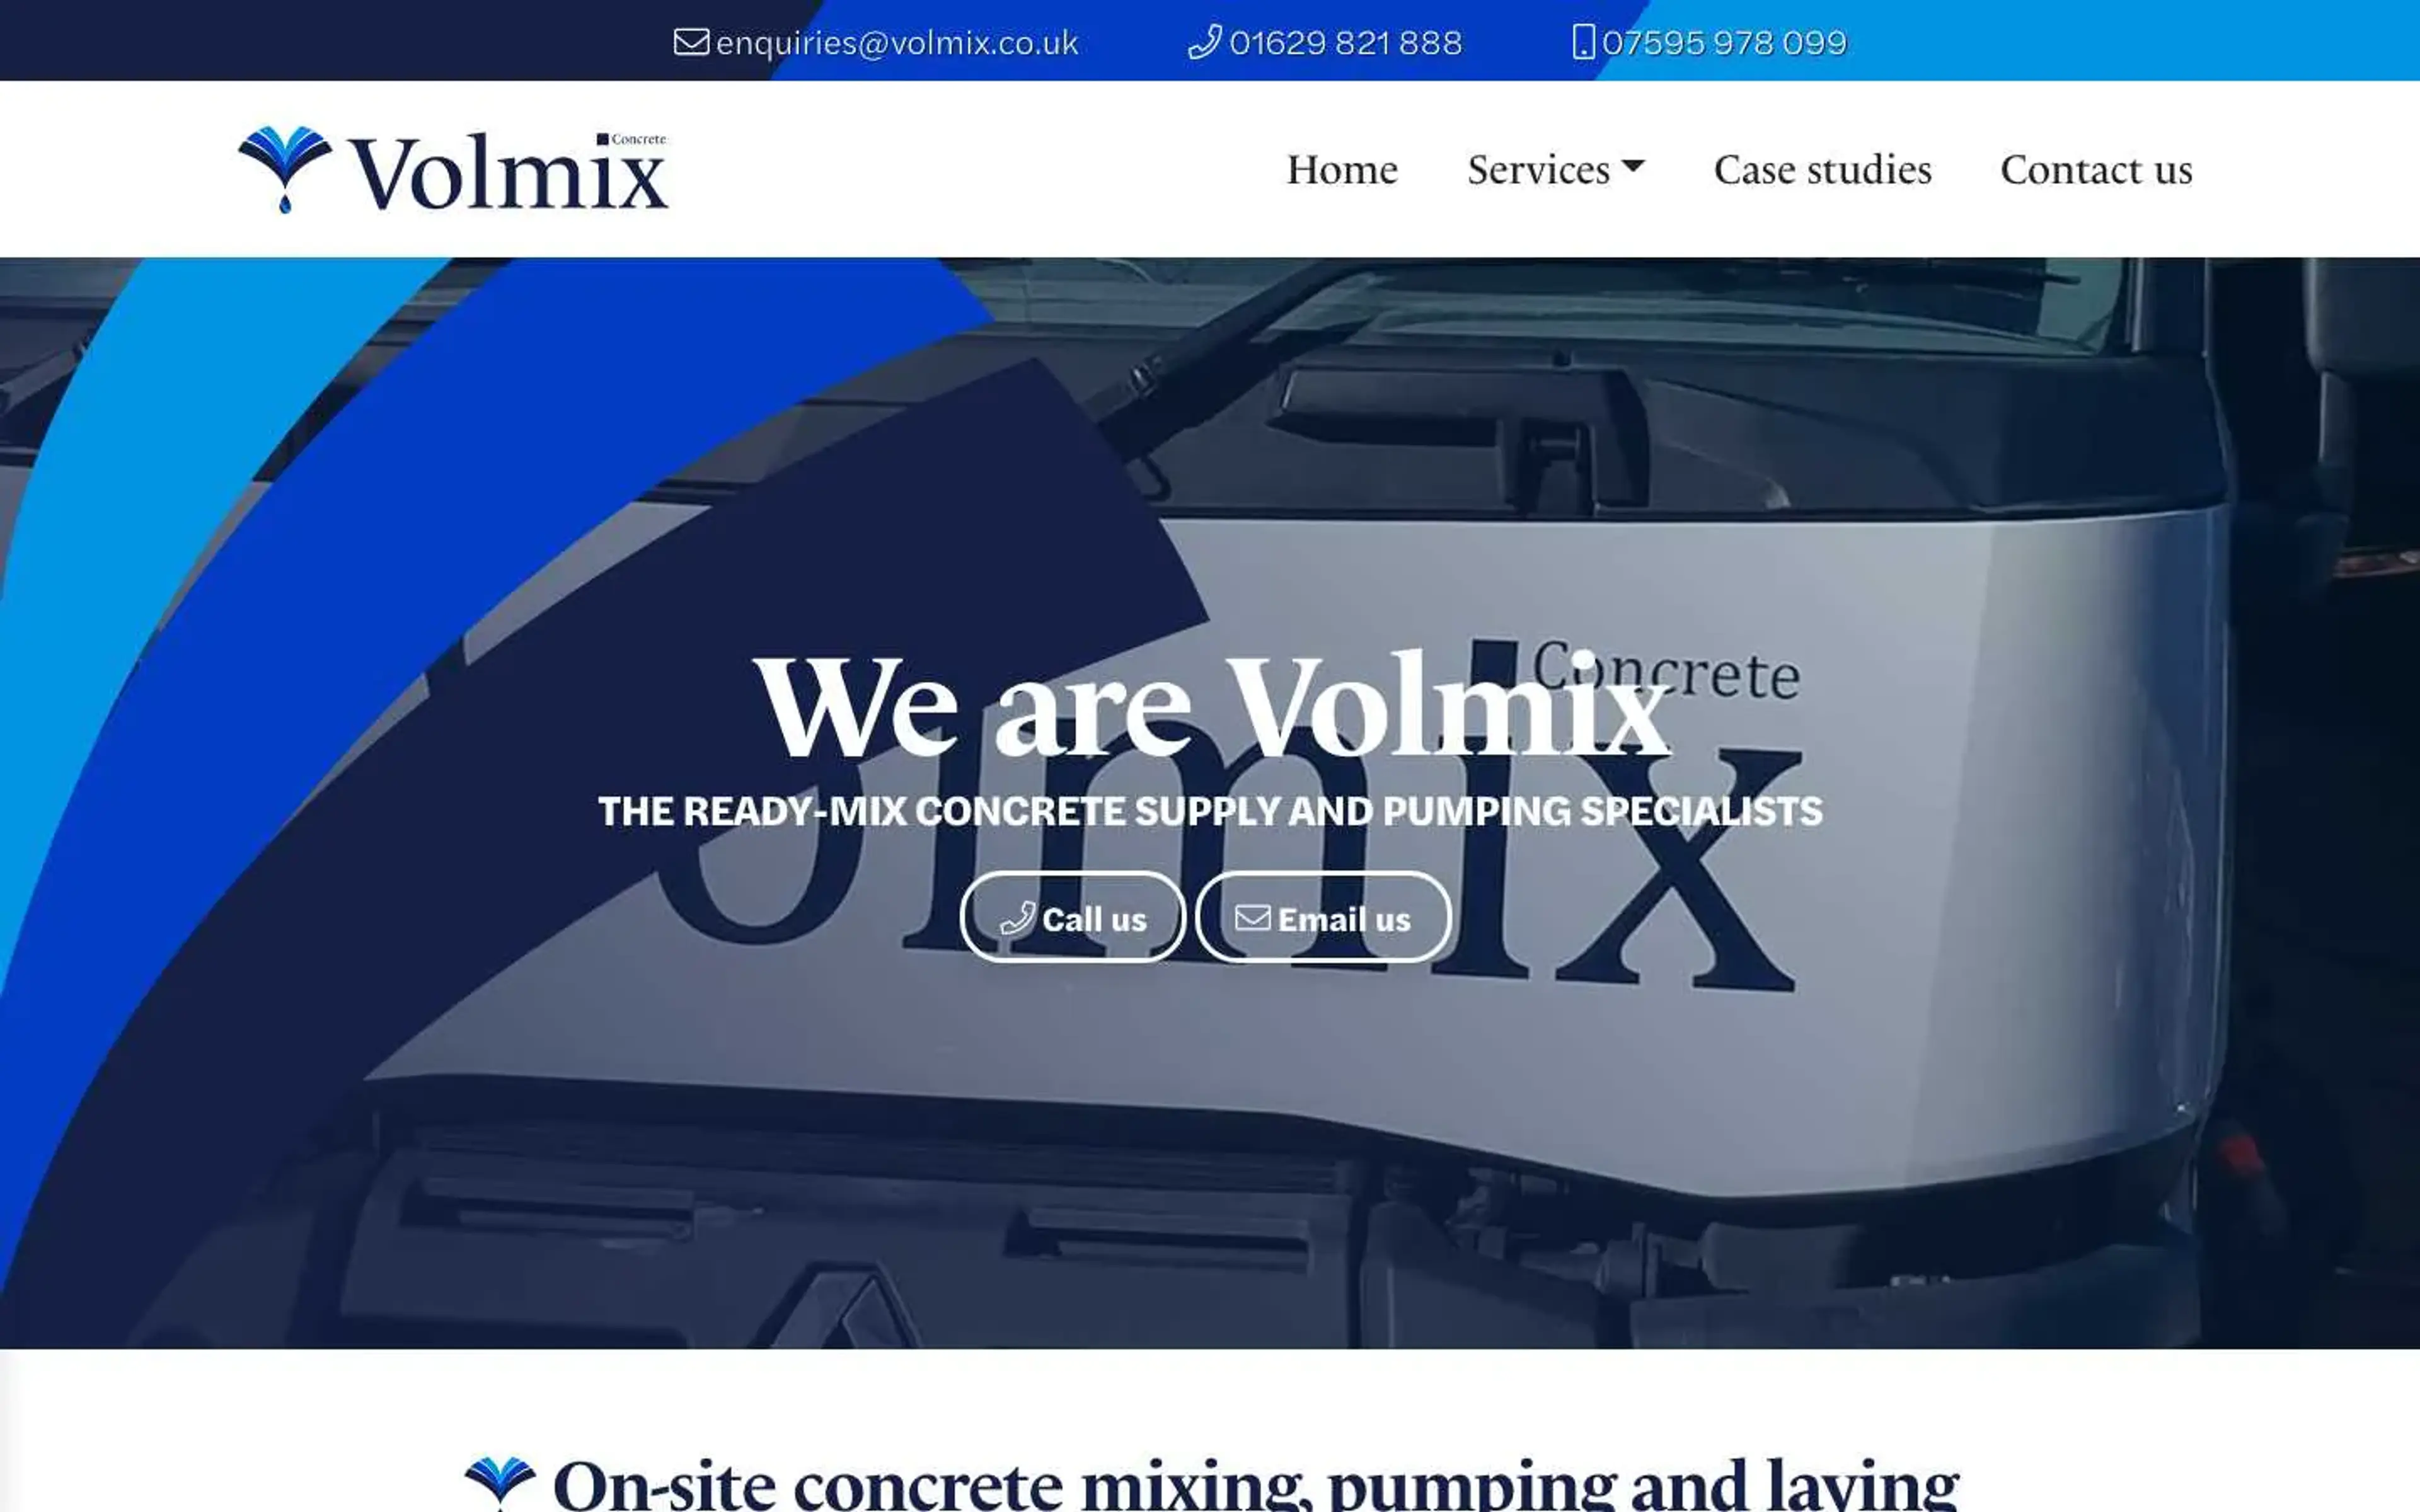 Recent project we worked on for Volmix